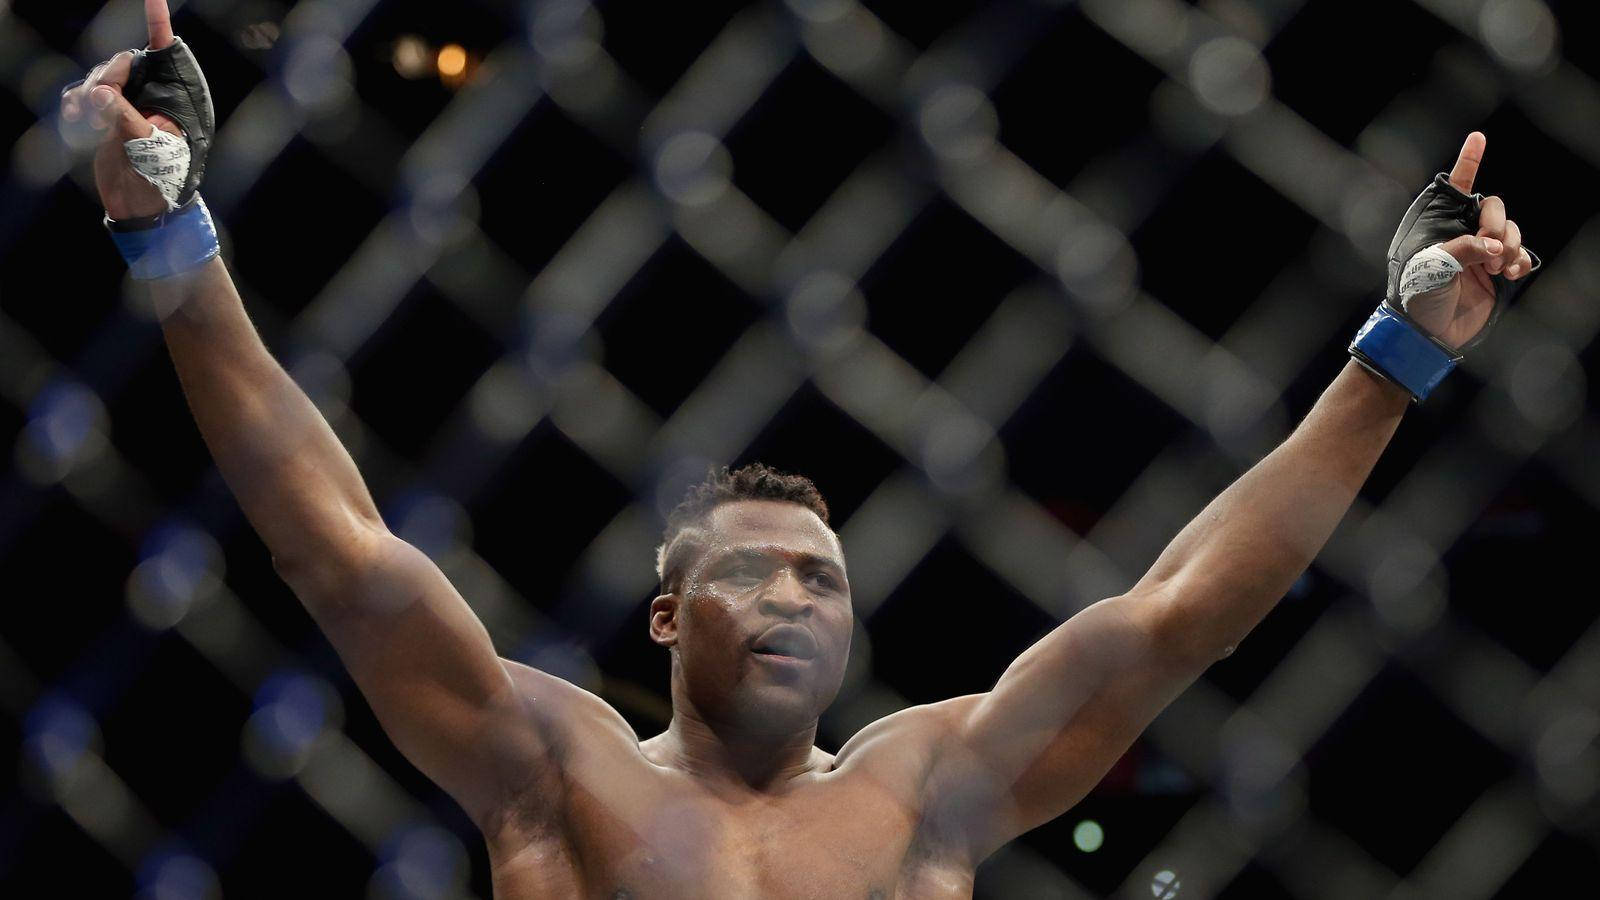 Francis Ngannou Segrande. (in The Context Of Computer Or Mobile Wallpaper, This Could Be Used As A Caption Or Title For An Image Featuring Francis Ngannou Triumphing In A Fight.) Wallpaper